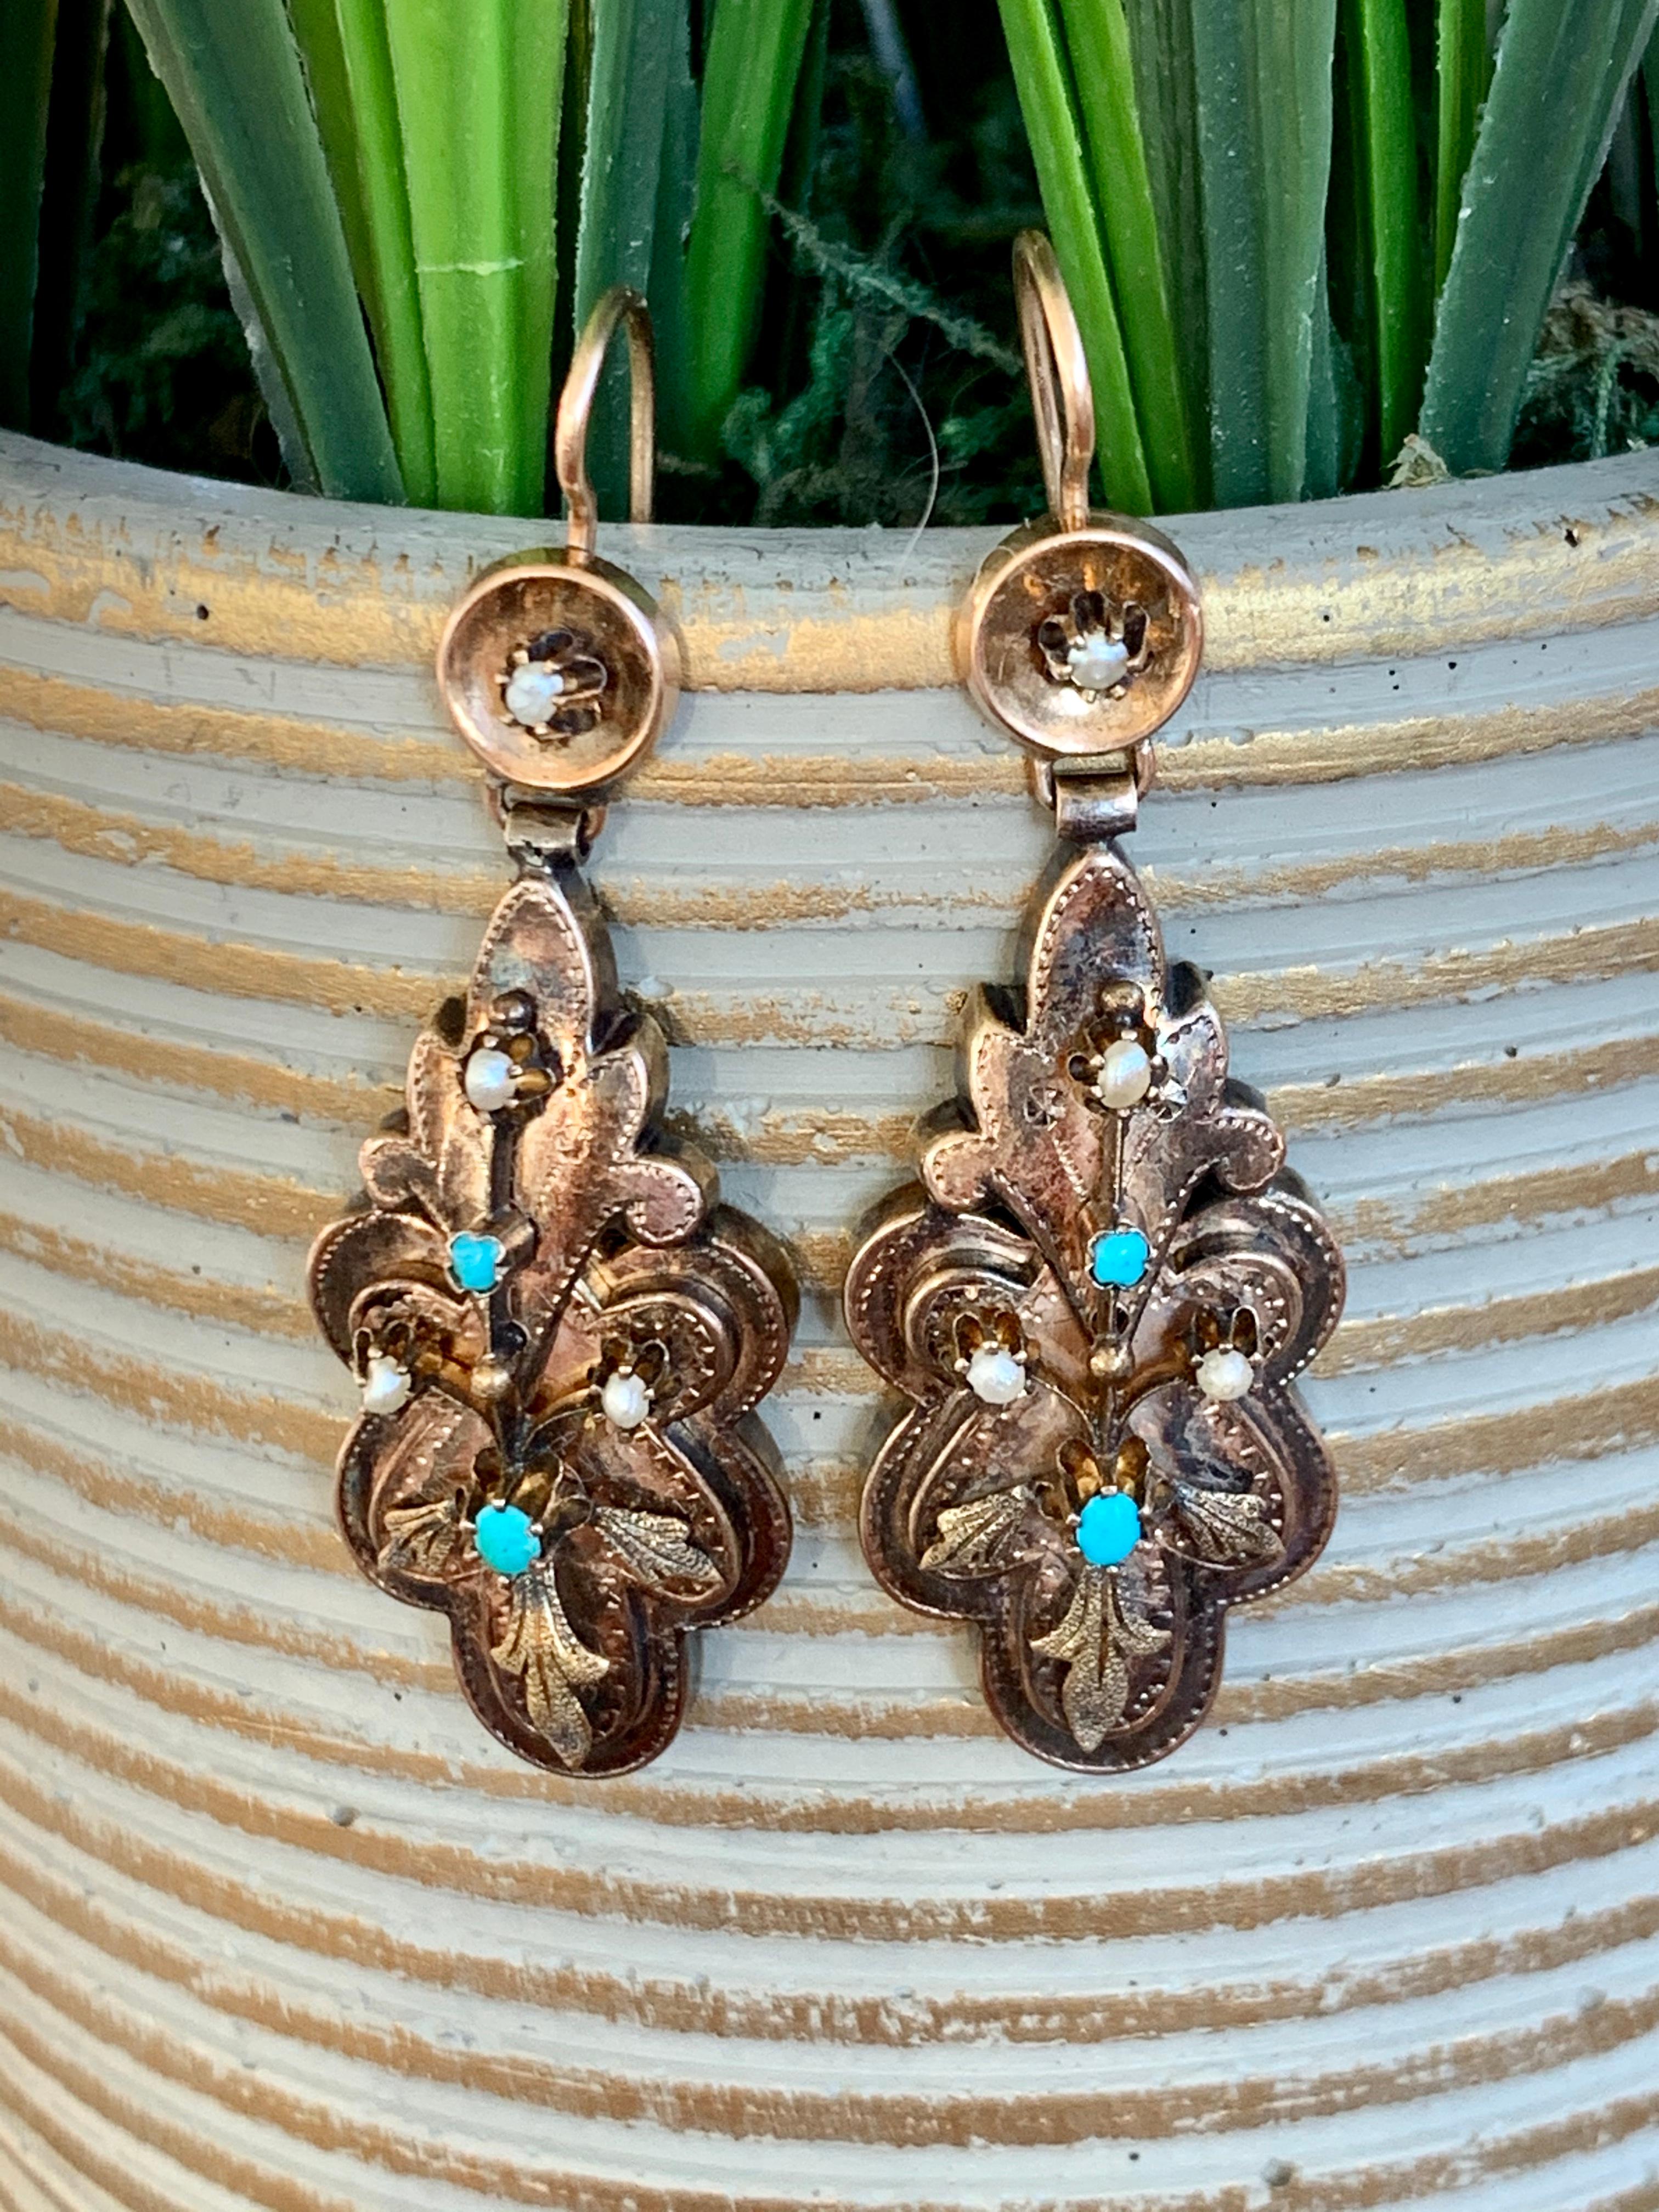 These Victorian earrings feature two Turquoise stones and three Pearls in each earring.  They sit amongst the beautiful intricate Gold workmanship which is seen in Victorian jewelry.

A shepherd's hook ear wire holds the earrings in place. 

Size: